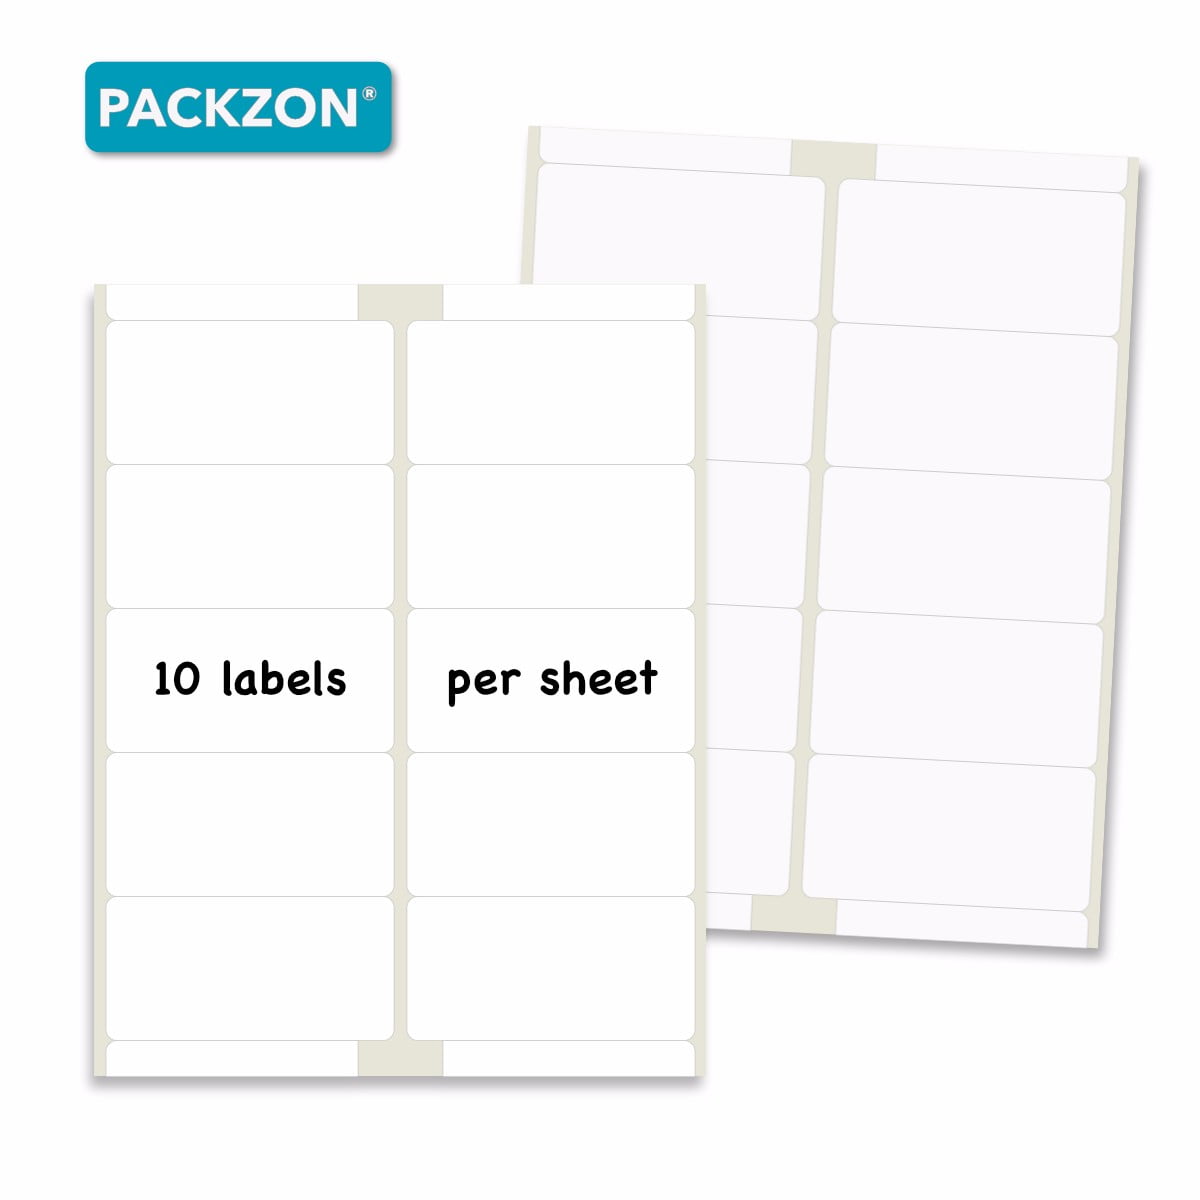 10 x 5 cm 200 Labels White Rectangular Removable Residue-Free Label Stickers Peels Off Easily